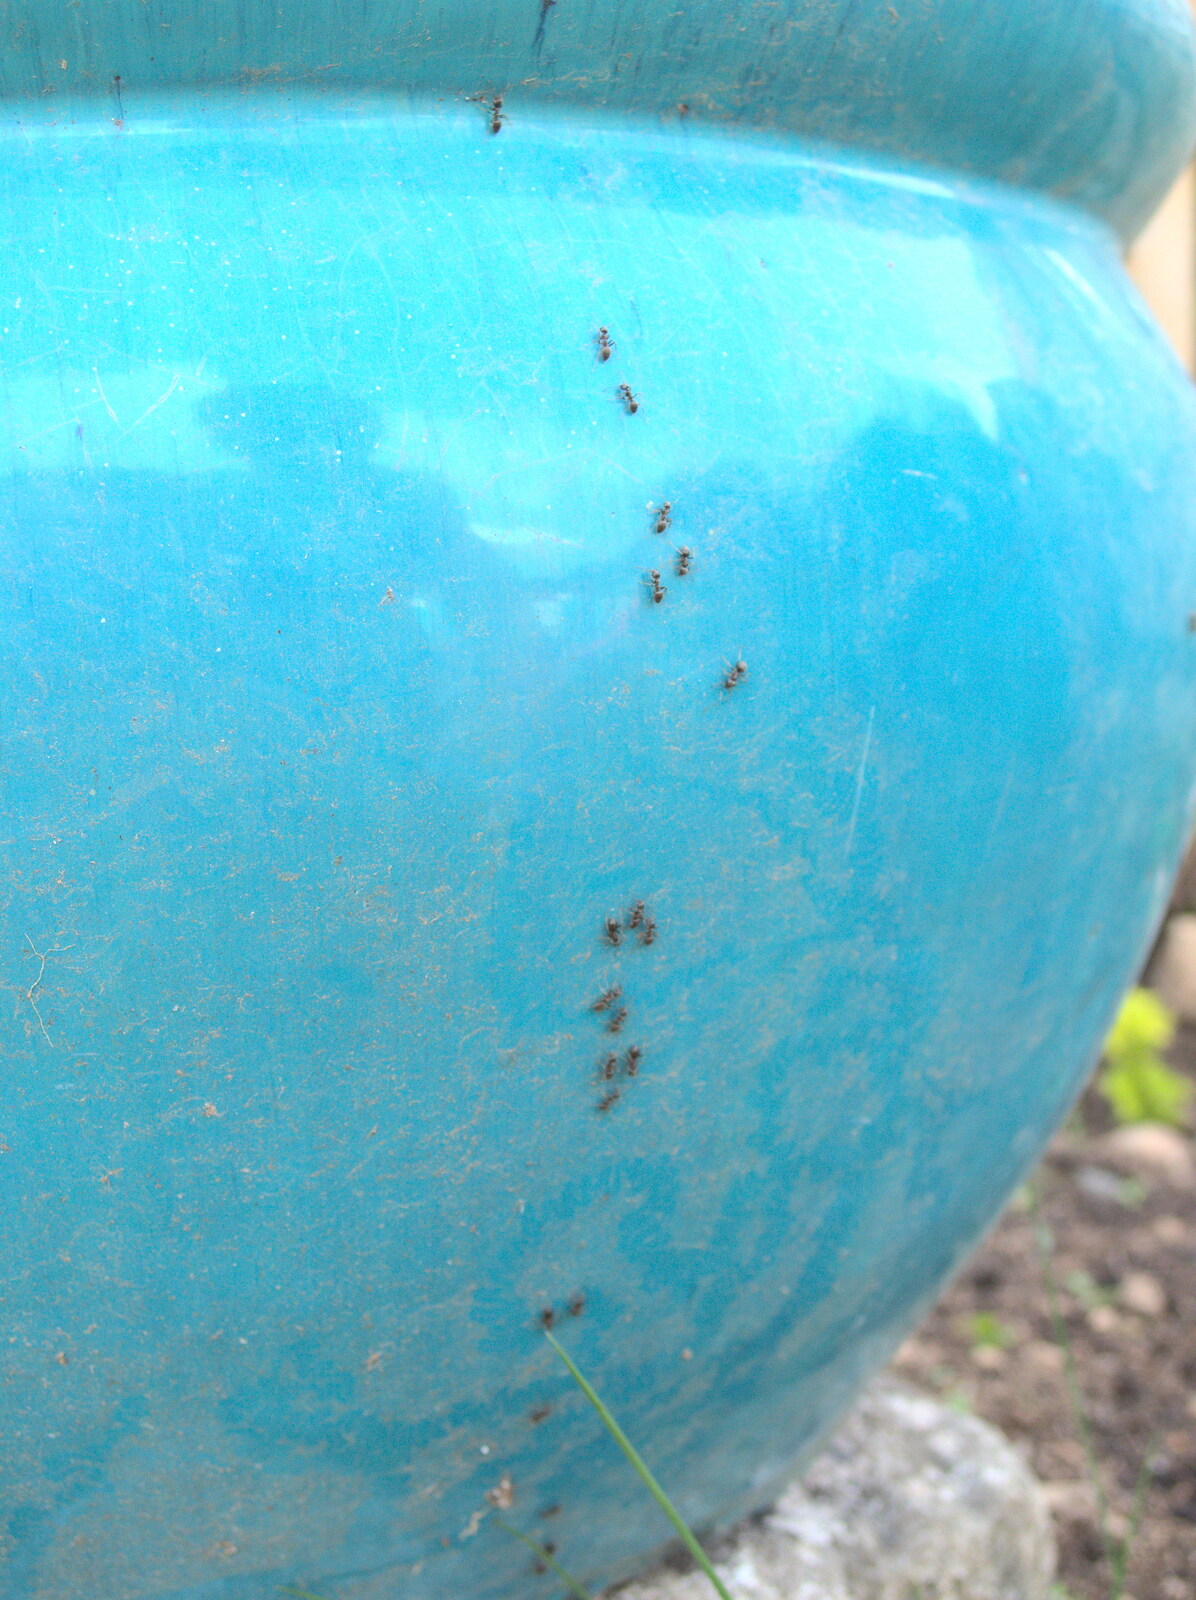 A line of ants crawls up a plant pot from The Grand Re-opening of the Chagford Lido, Chagford, Devon - 28th May 2016